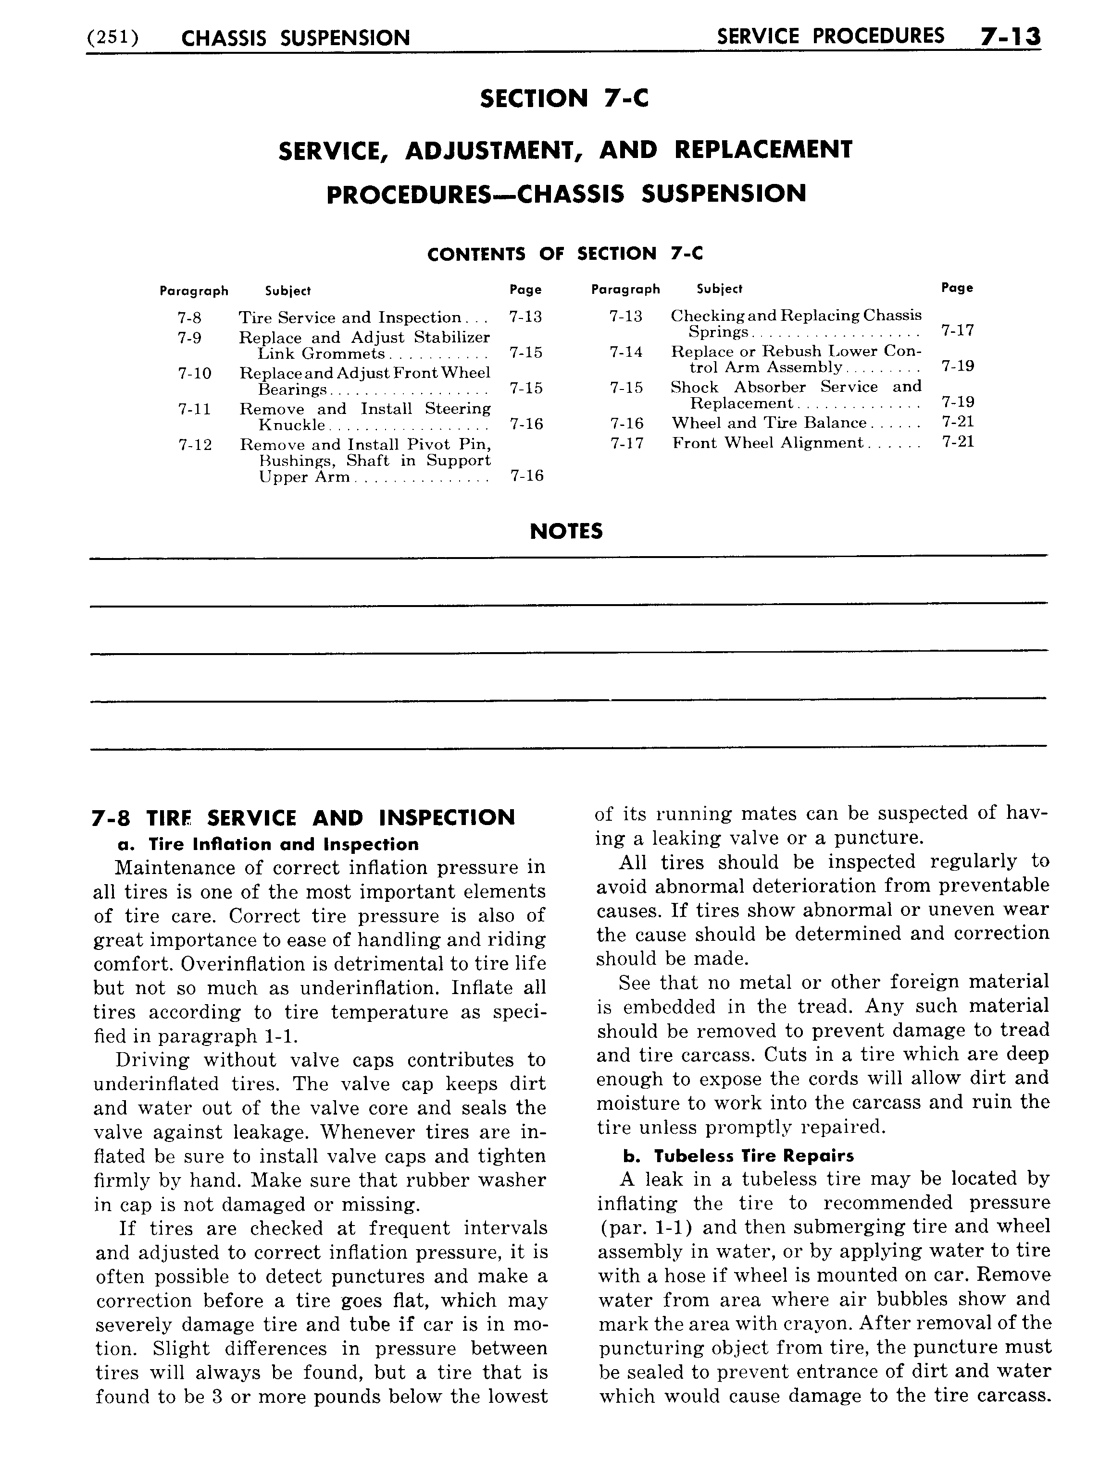 n_08 1956 Buick Shop Manual - Chassis Suspension-013-013.jpg